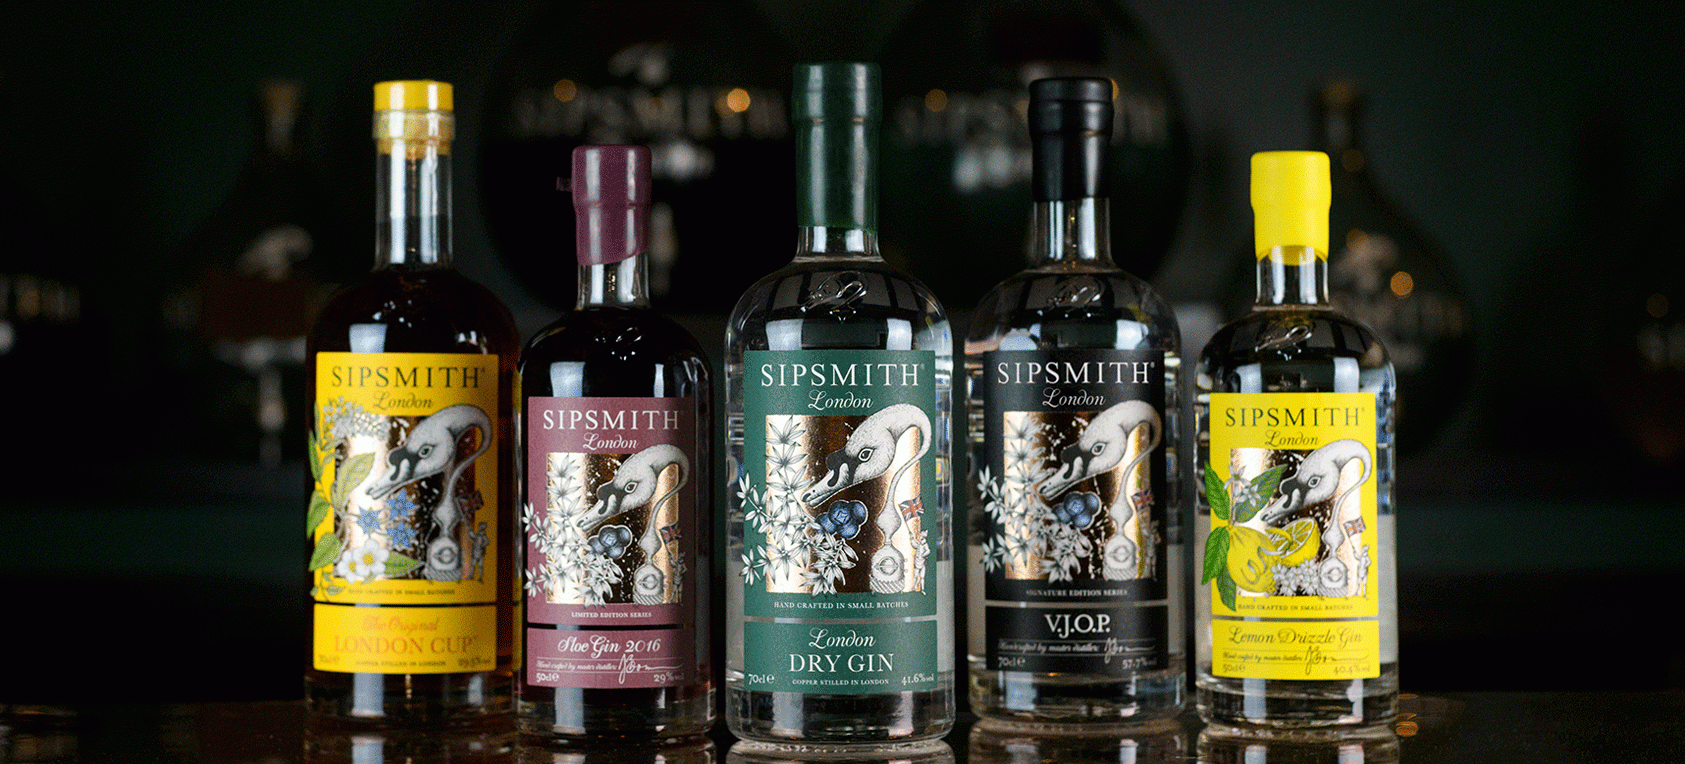 Sipsmith gins